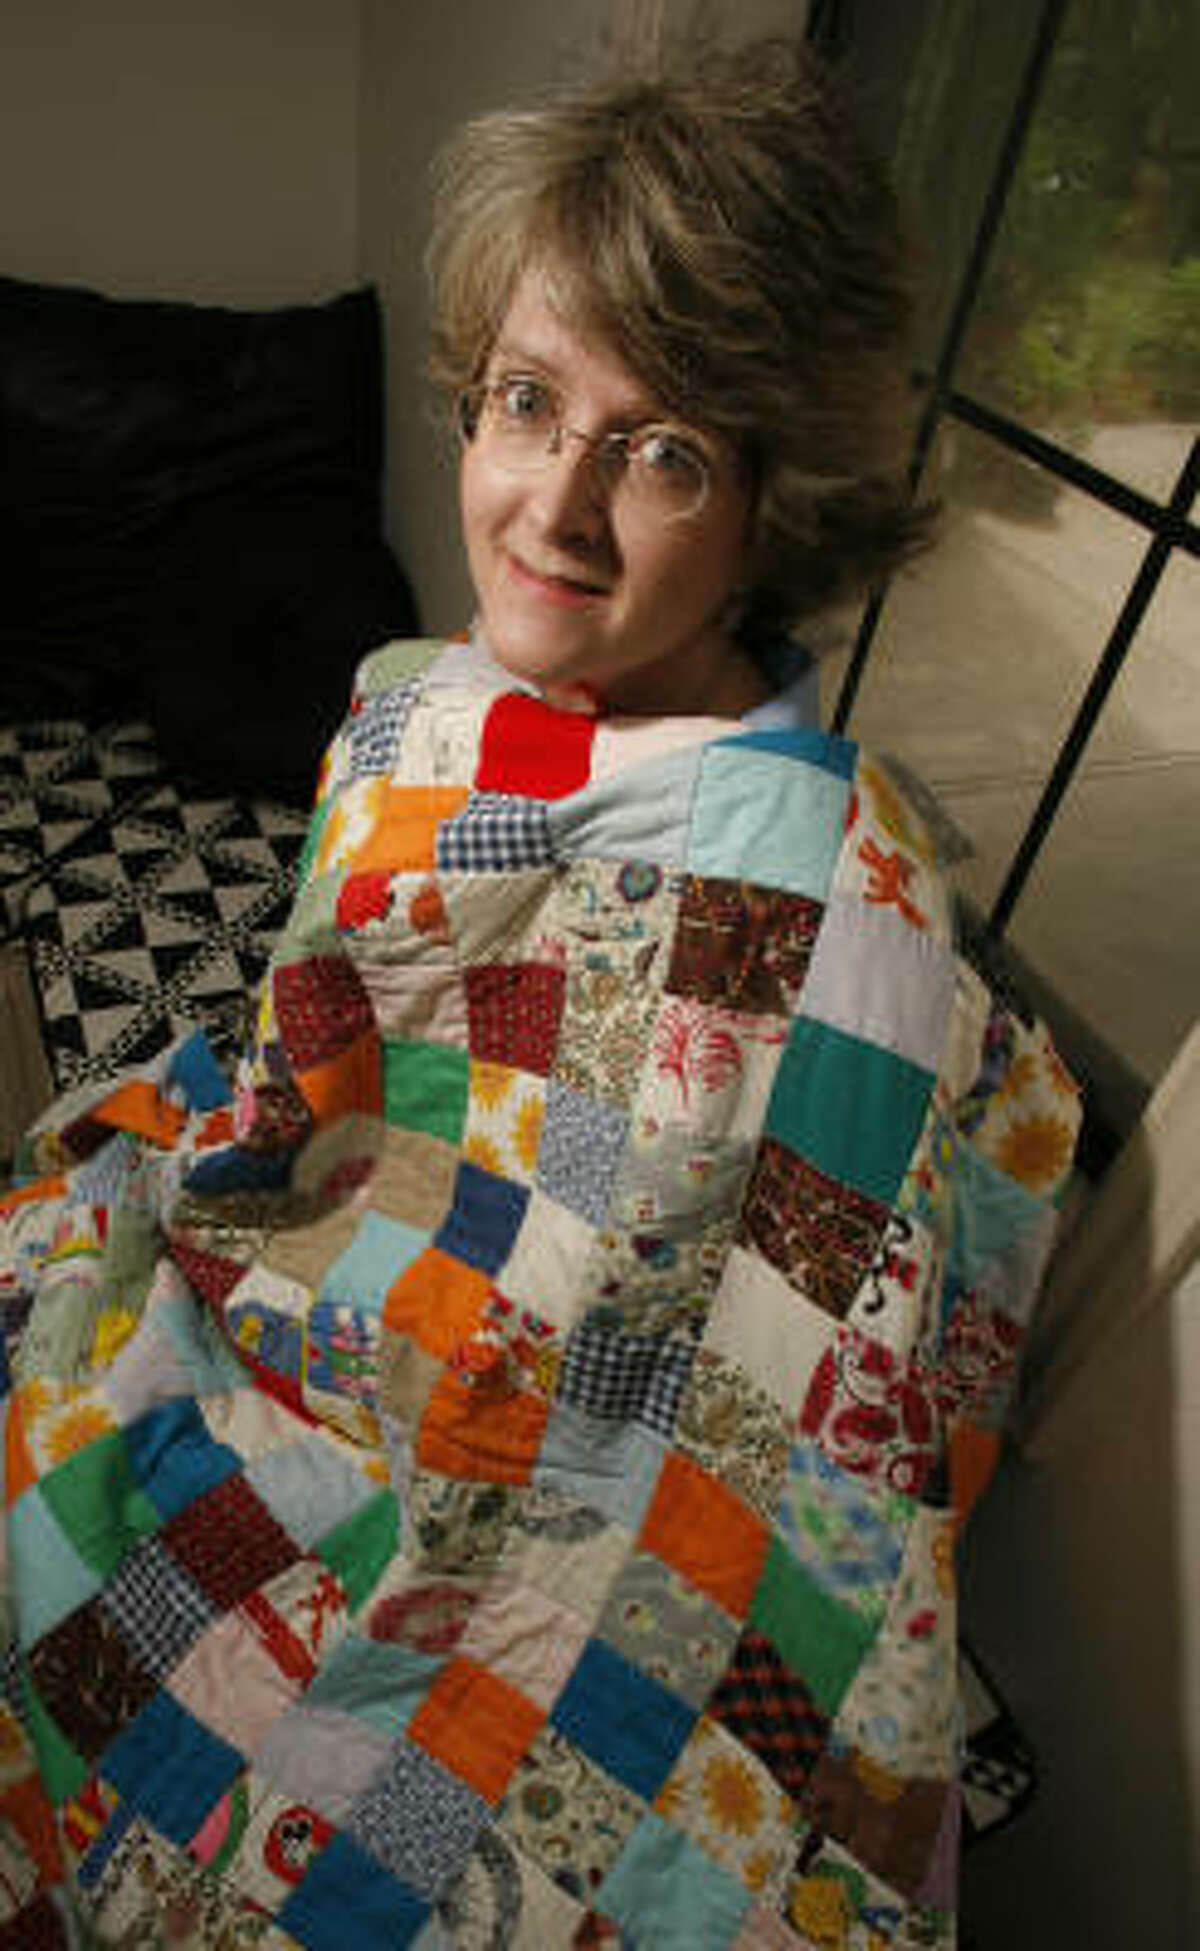 Cynthia England, blanketed by the first quilt she made, has won the top prize at the International Quilt Festival in Houston twice.